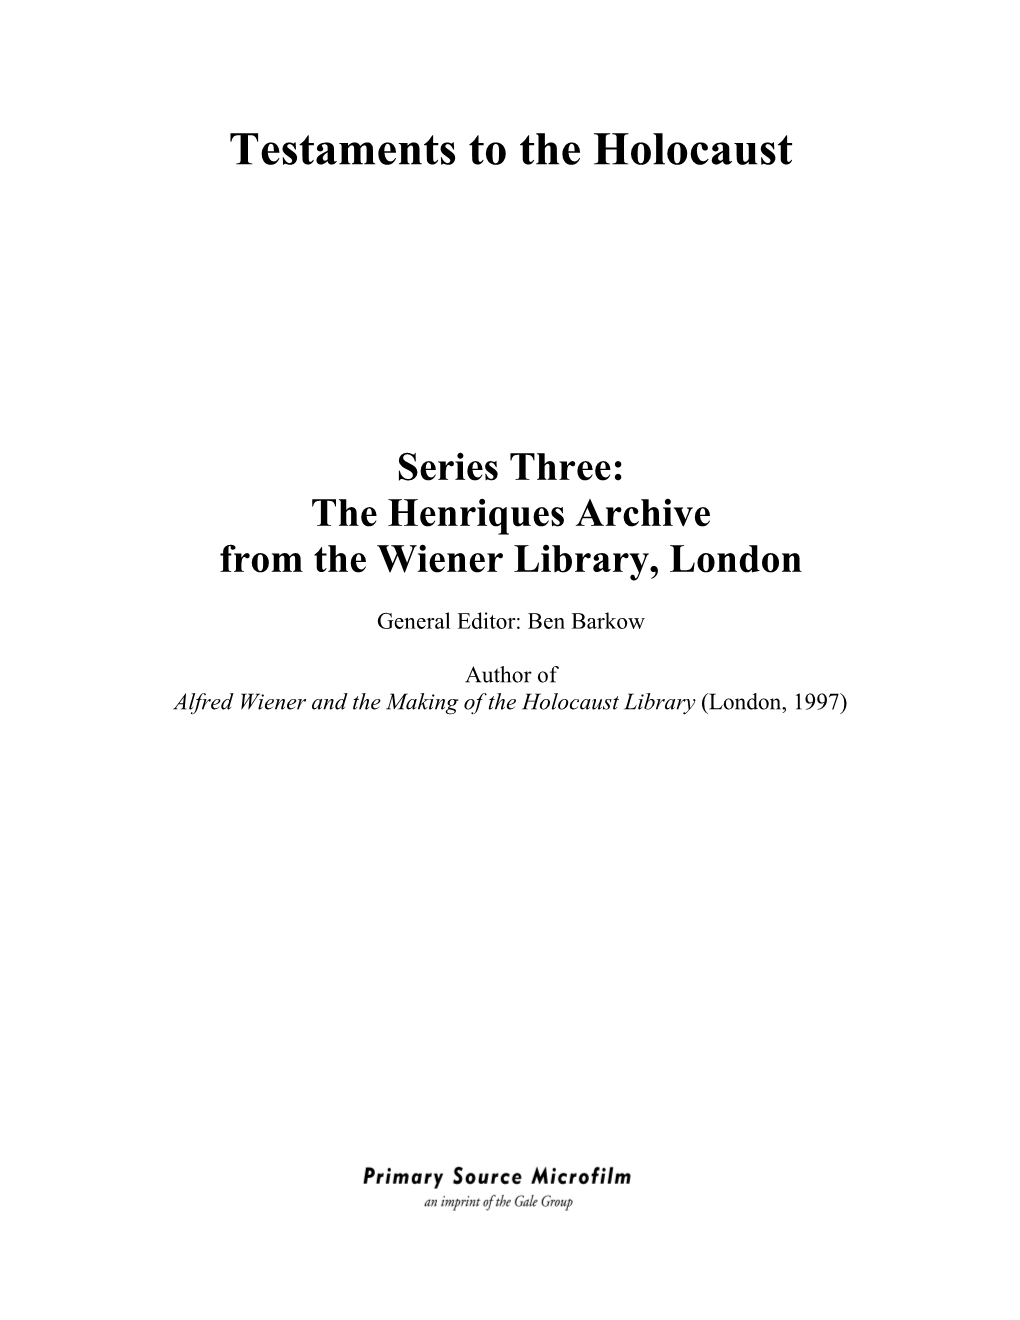 Series Three: the Henriques Archive from the Wiener Library, London